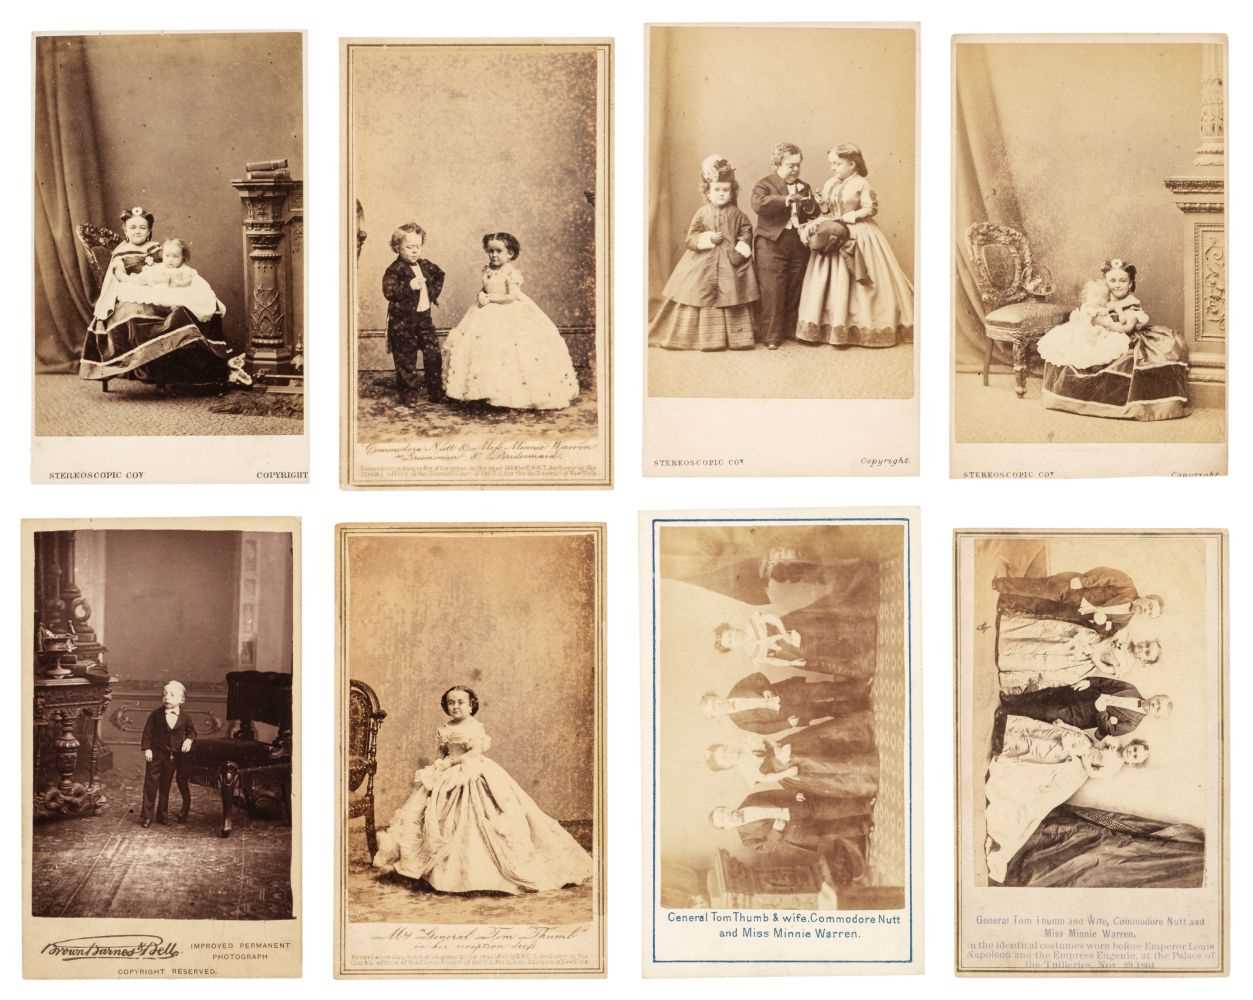 Lot 214 - A group of 8 cartes de visite of general Tom Thumb and his family, 1860